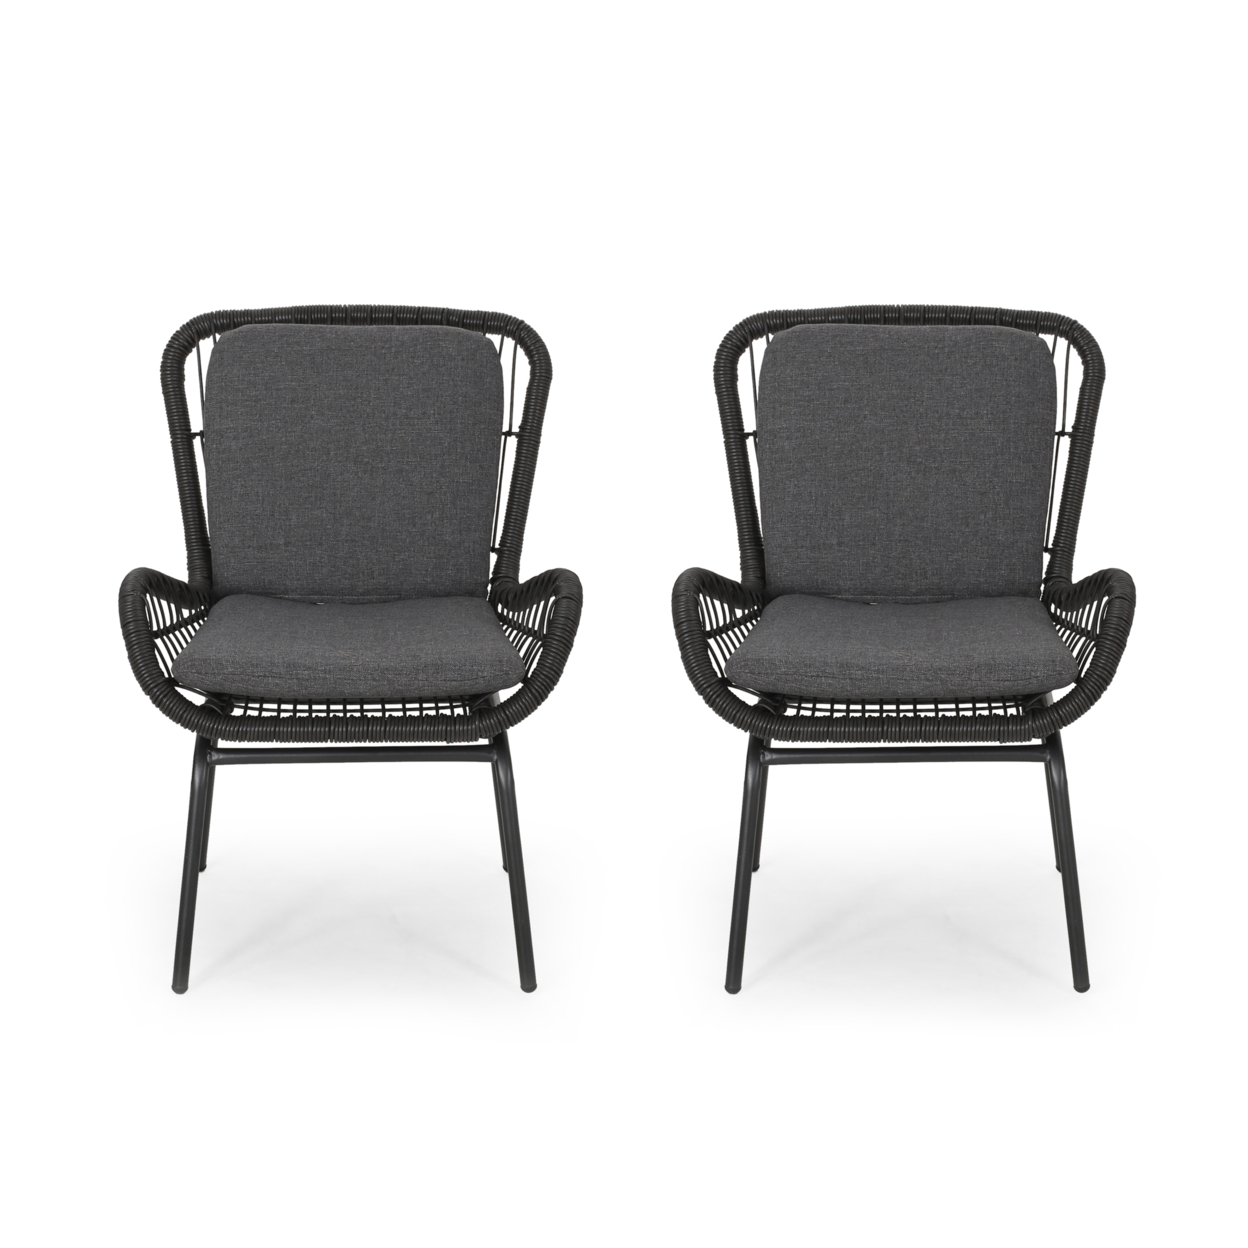 Alice Outdoor Wicker Club Chair With Cushions (Set Of 2) - Gray + Dark Gray